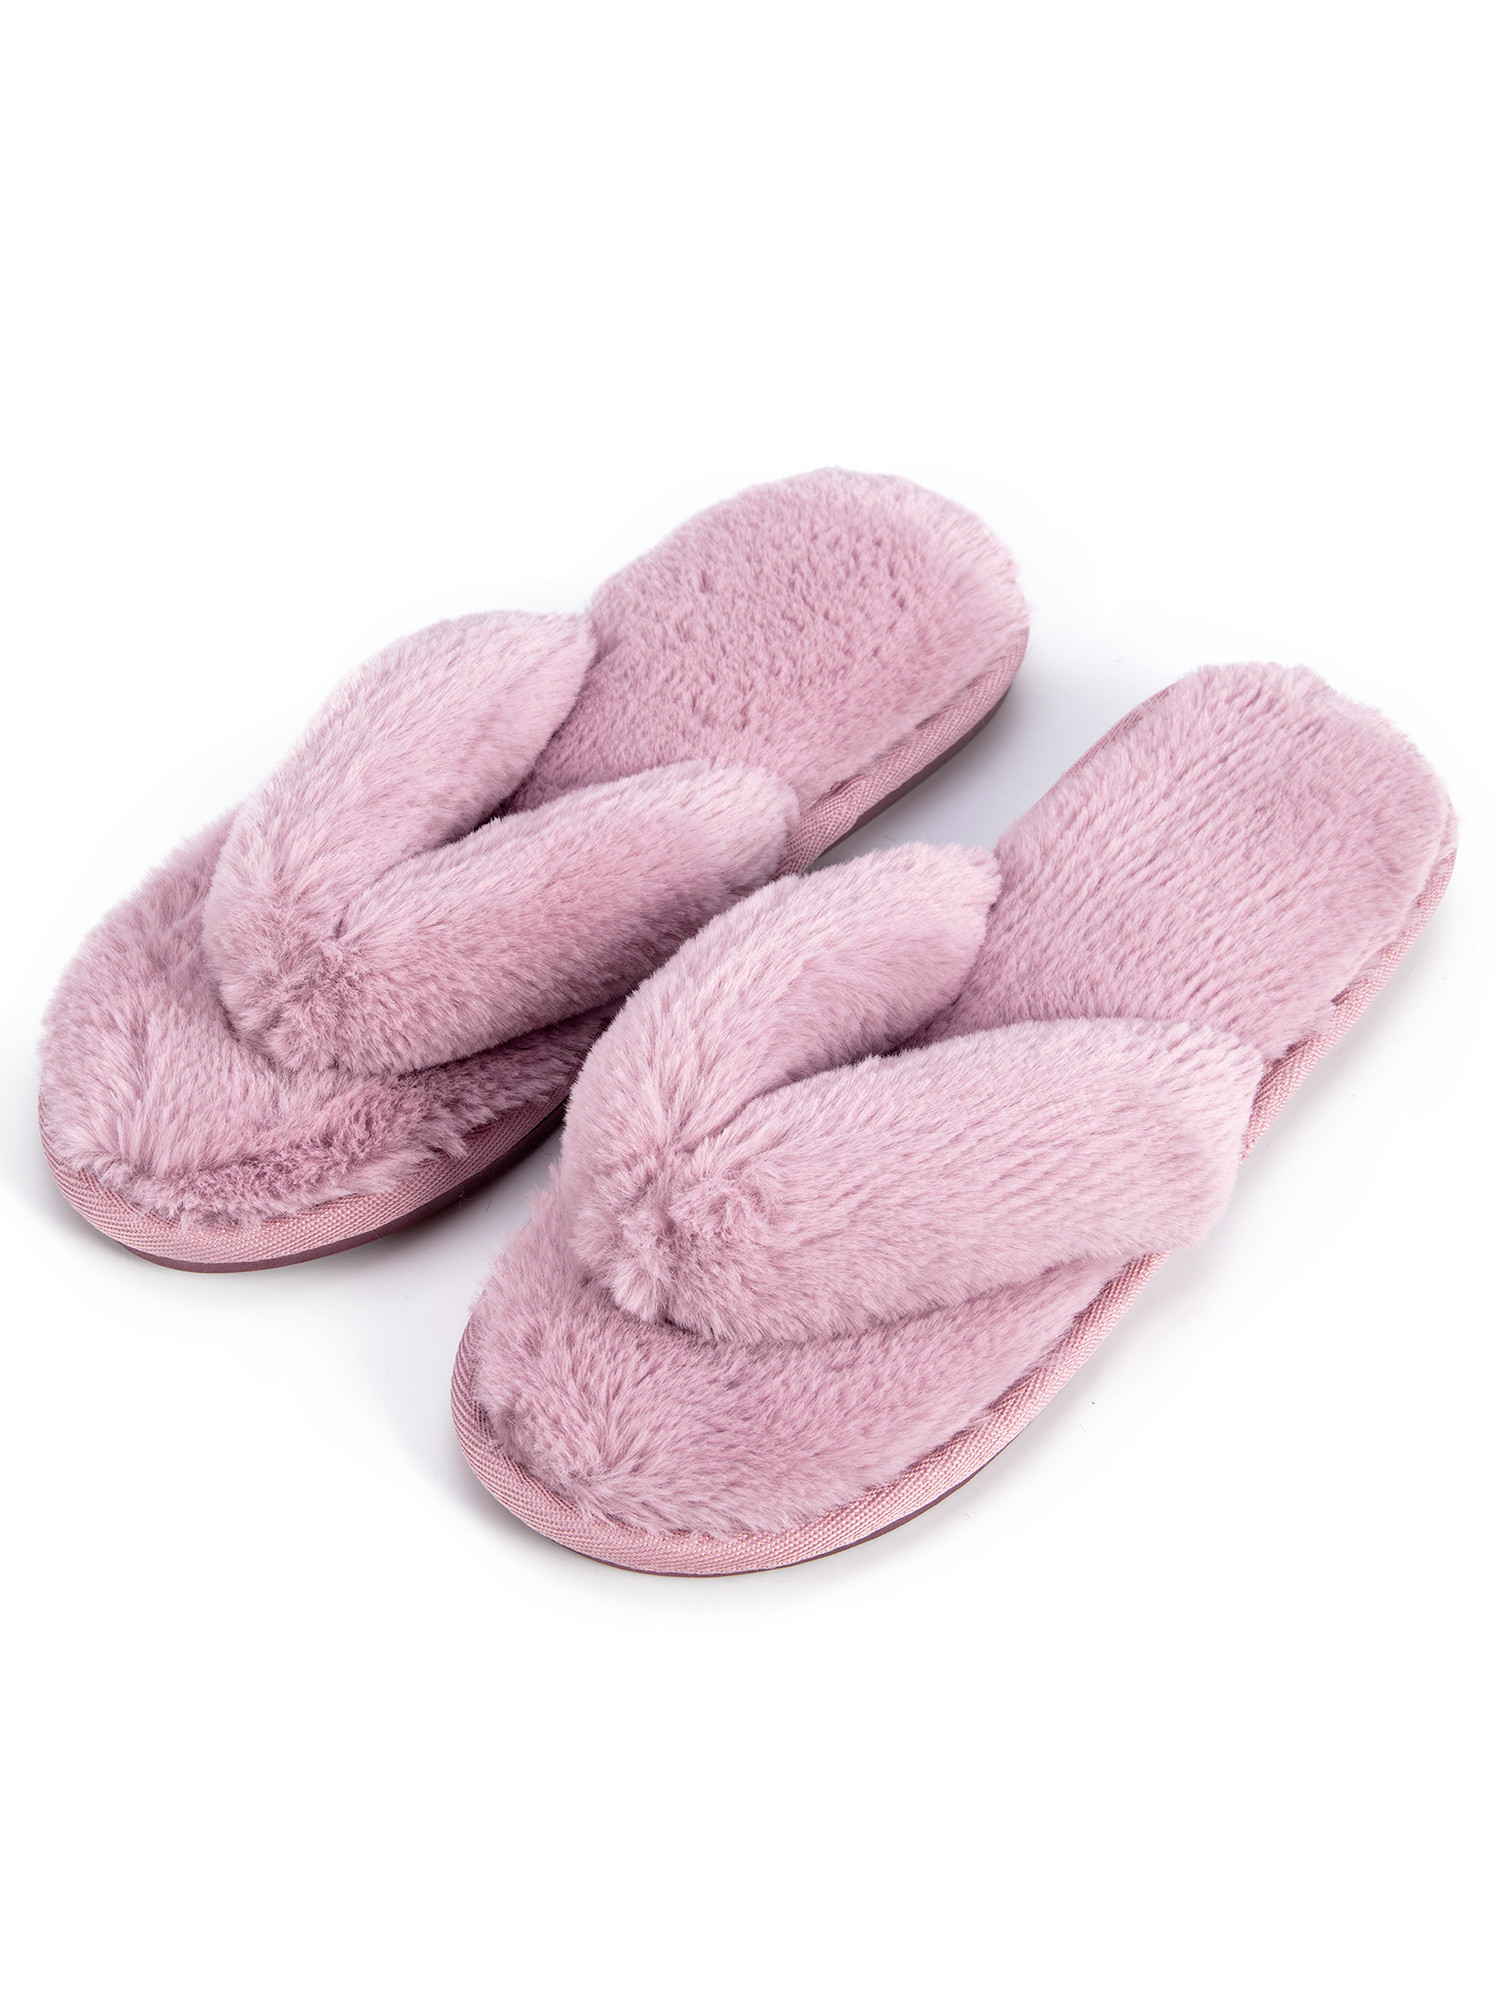 Bedroom Shoes For Womens
 NK FASHION NK FASHION Women s Bedroom Slippers fort